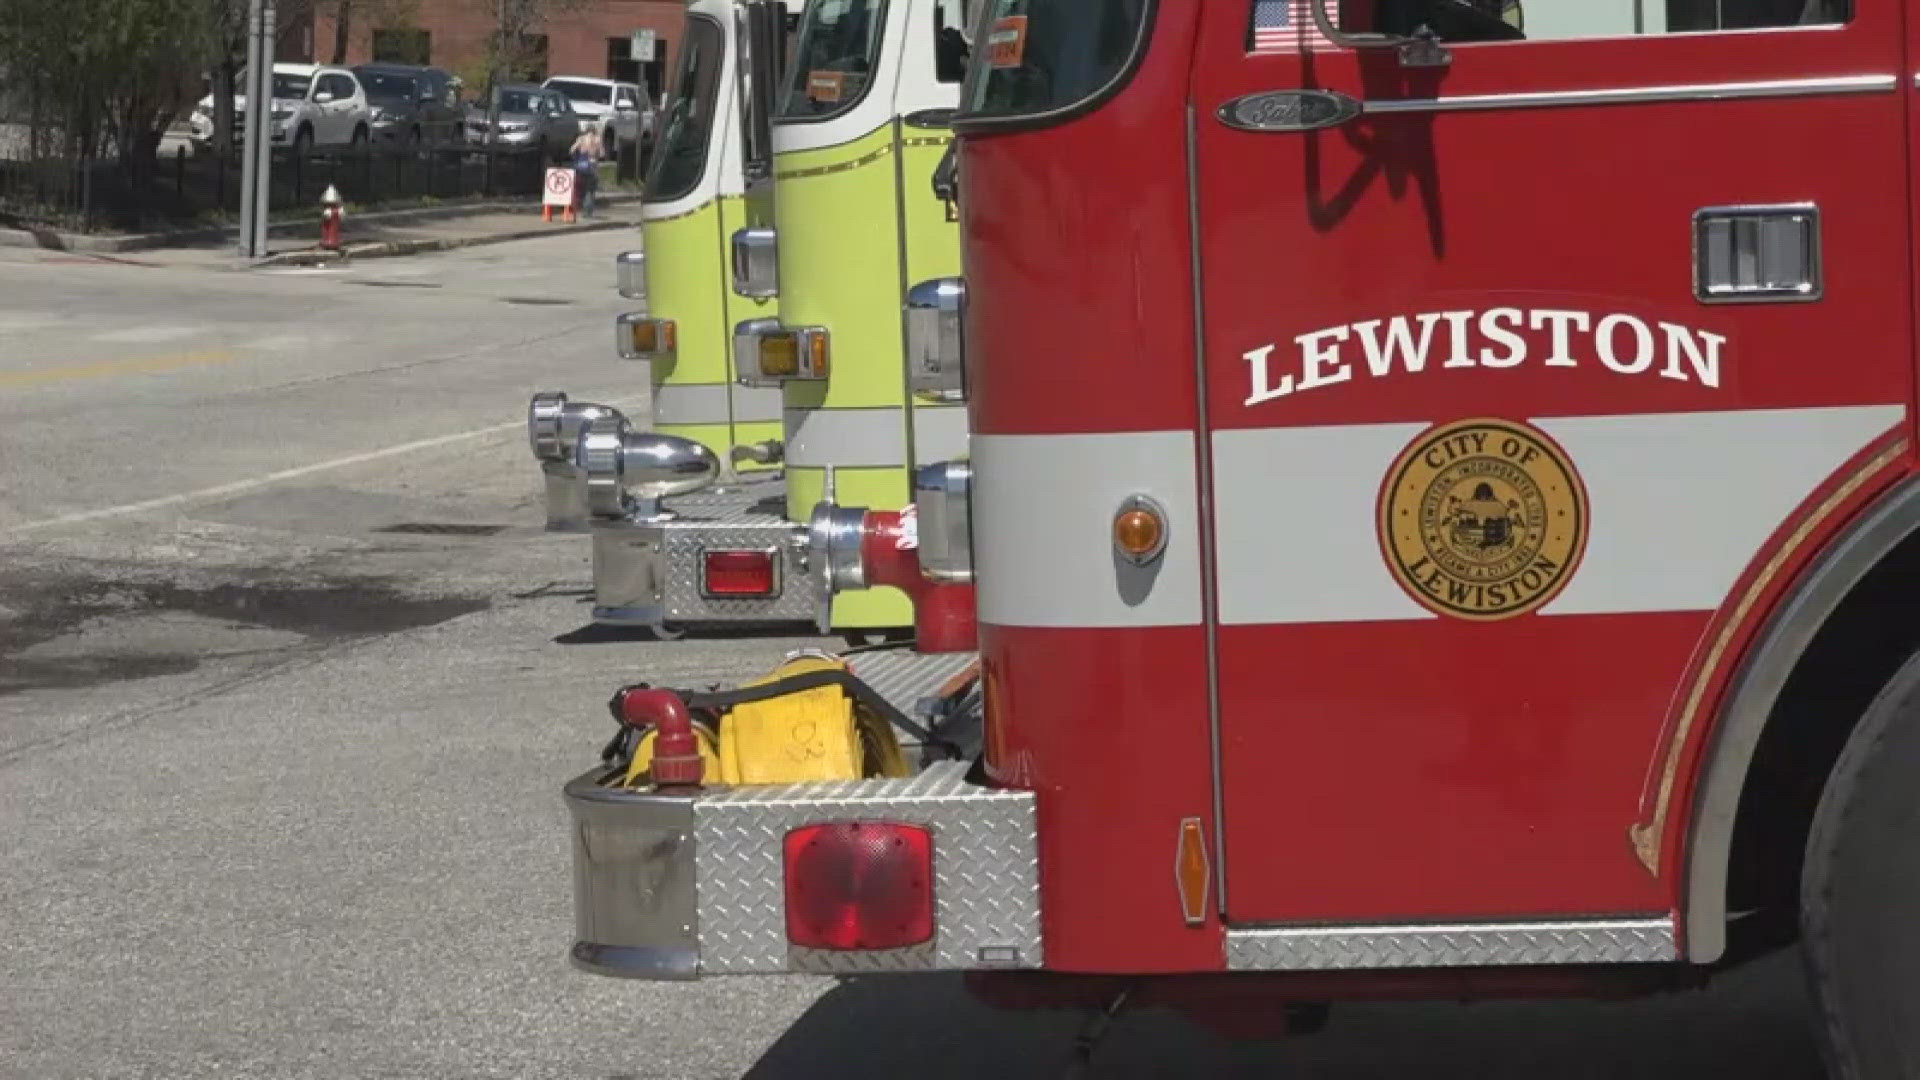 "We're tired of seeing people suffering waiting for ambulances," Lewiston's firefighters union president said.